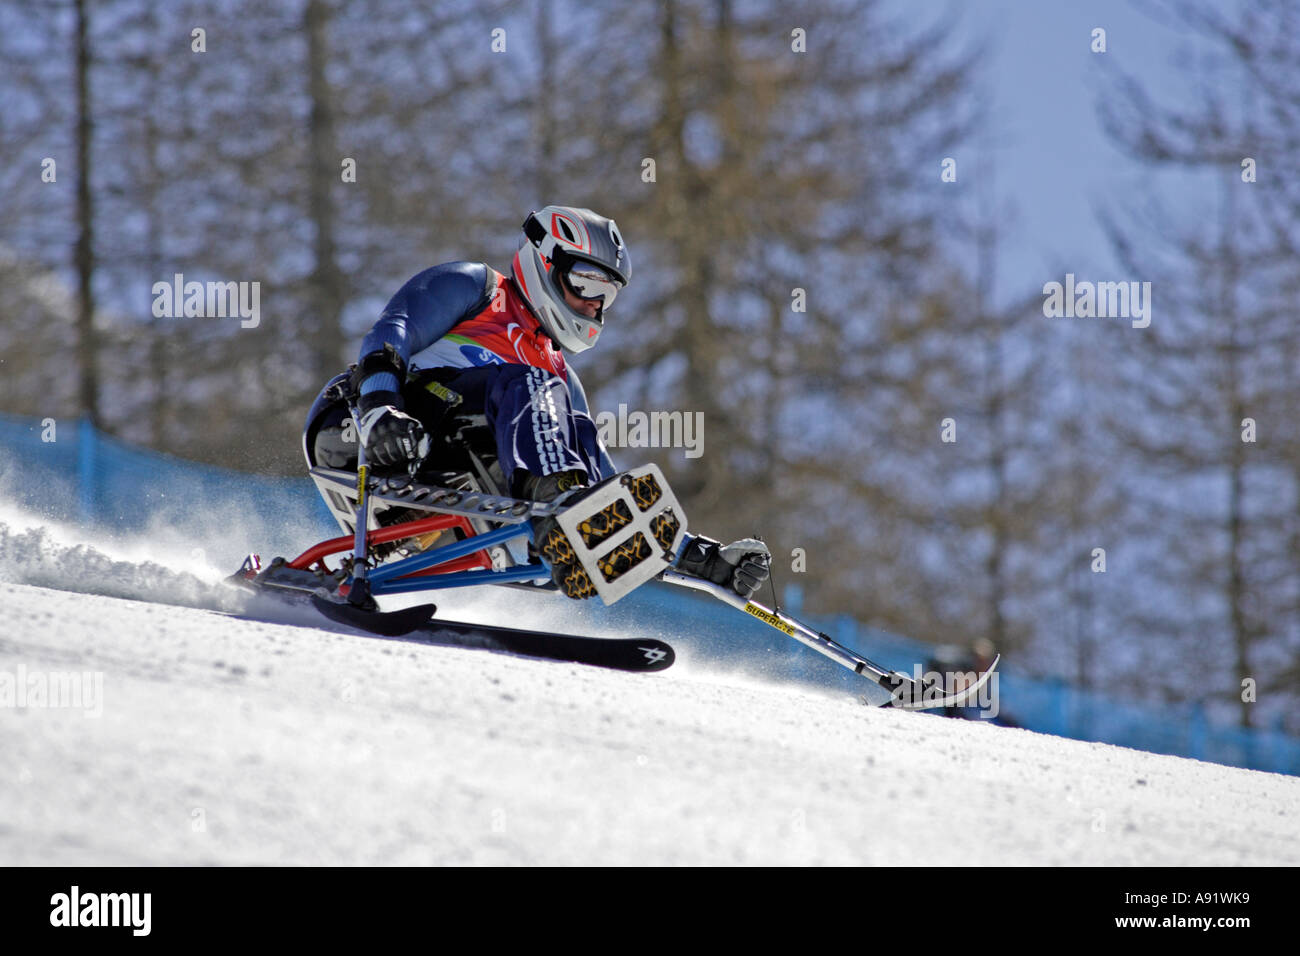 Russell Docker LW12 1 of Great Britain in the Mens Alpine Skiing Super G Sitting competition Stock Photo